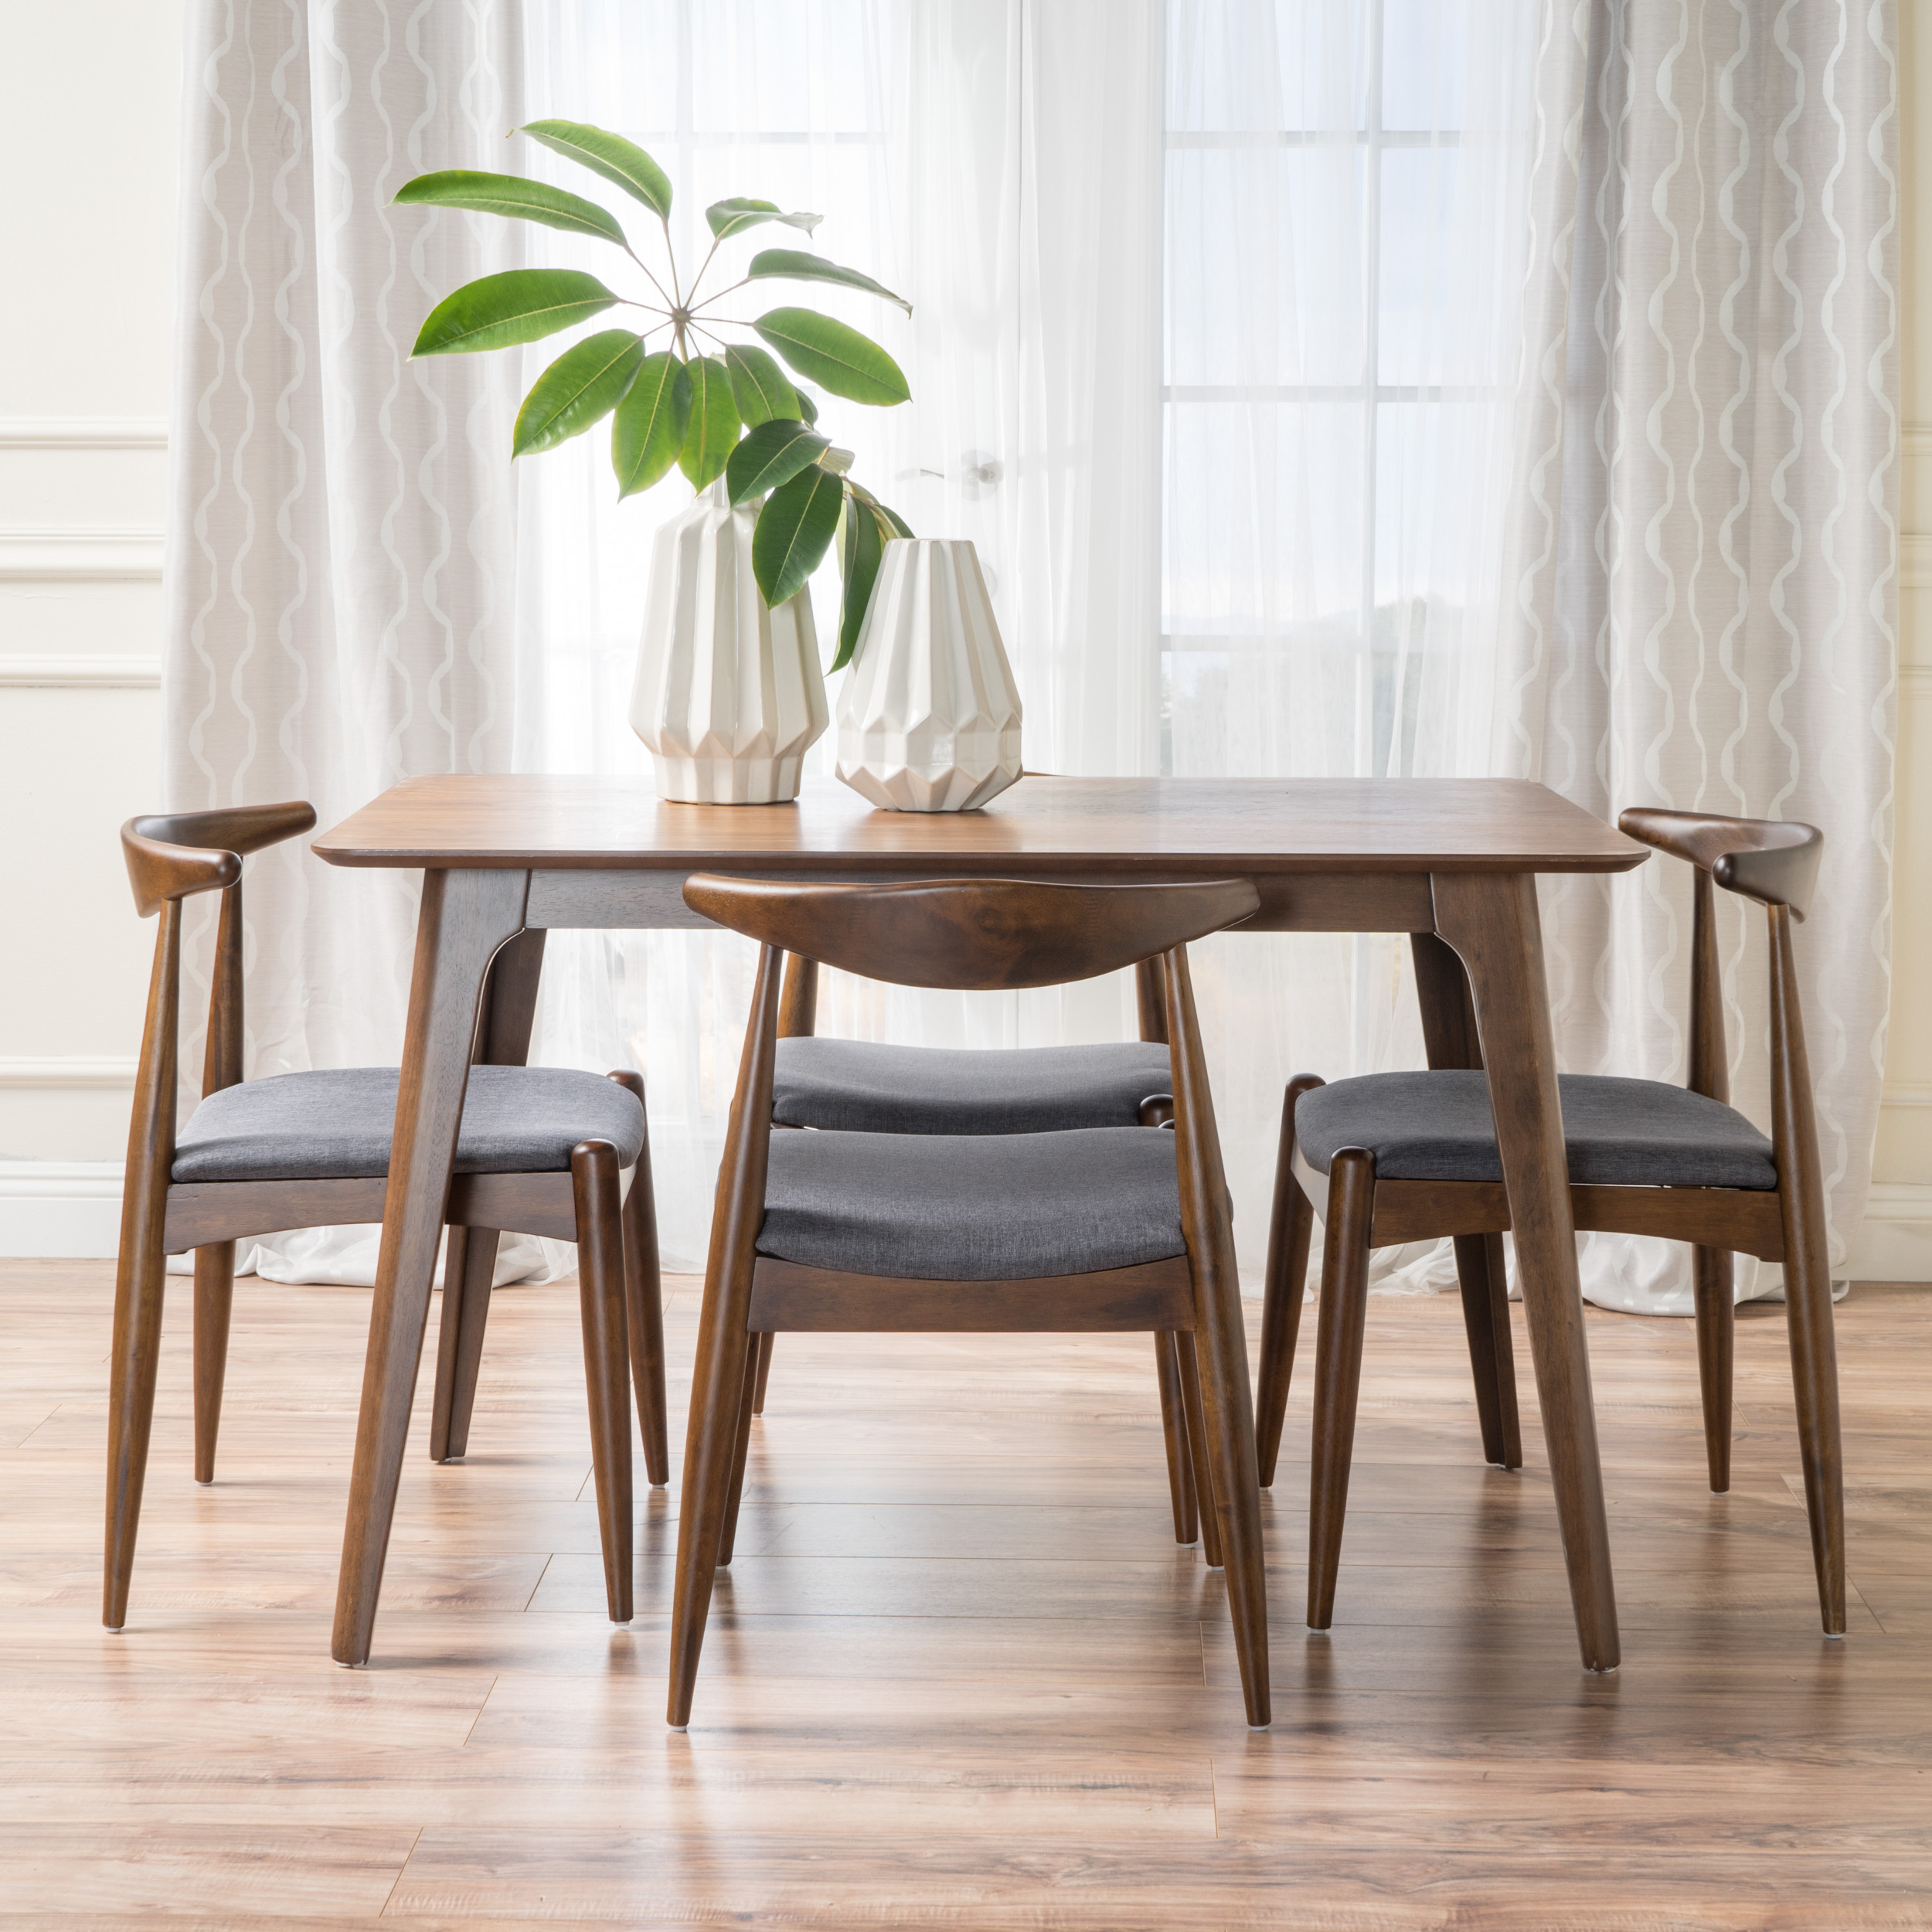 Noble House Eliza Mid-Century Modern 5 Piece Dining Set, Charcoal and Natural Walnut - image 1 of 6